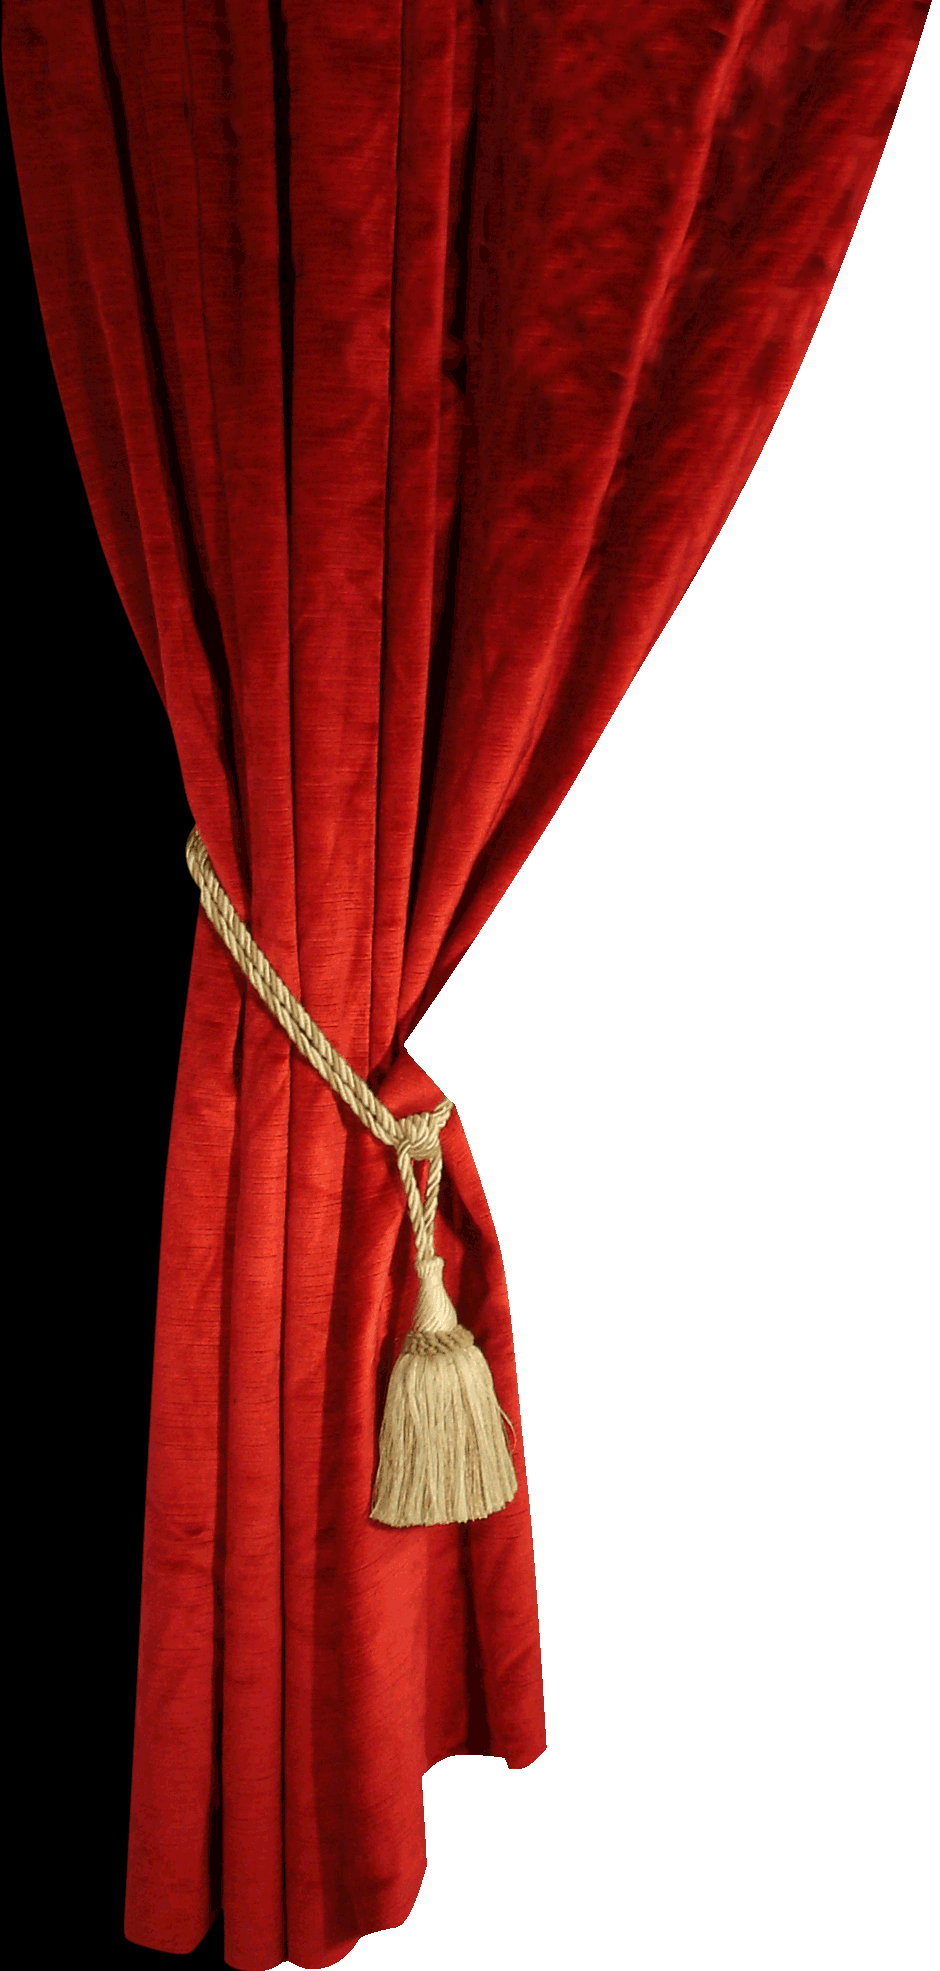 Curtains clipart left, Curtains left Transparent FREE for download on